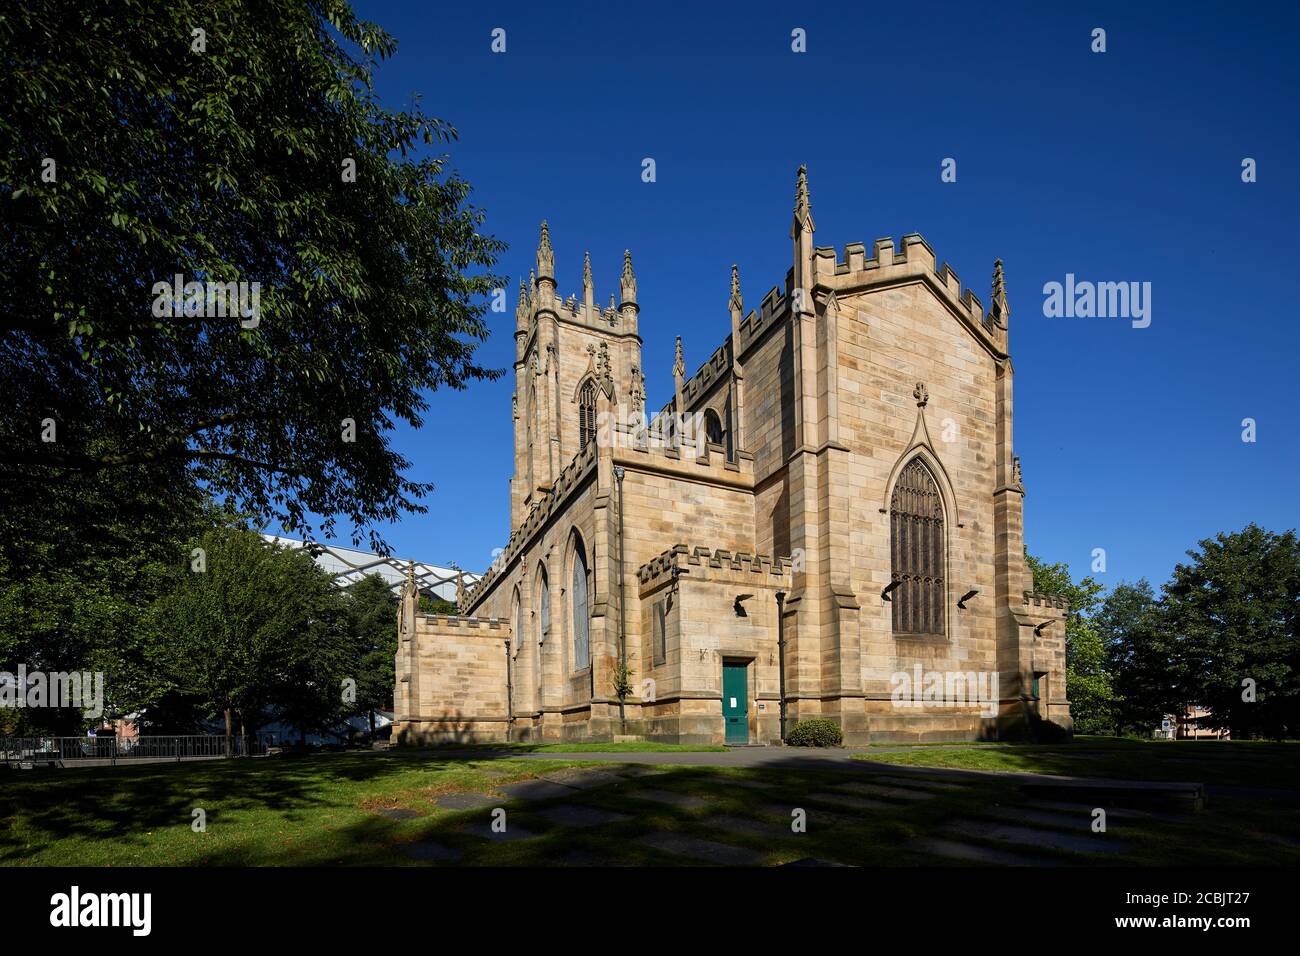 Former church St George's  in the City of Sheffield, England. It is now part of the University of Sheffield and is a lecture theatre and student housi Stock Photo